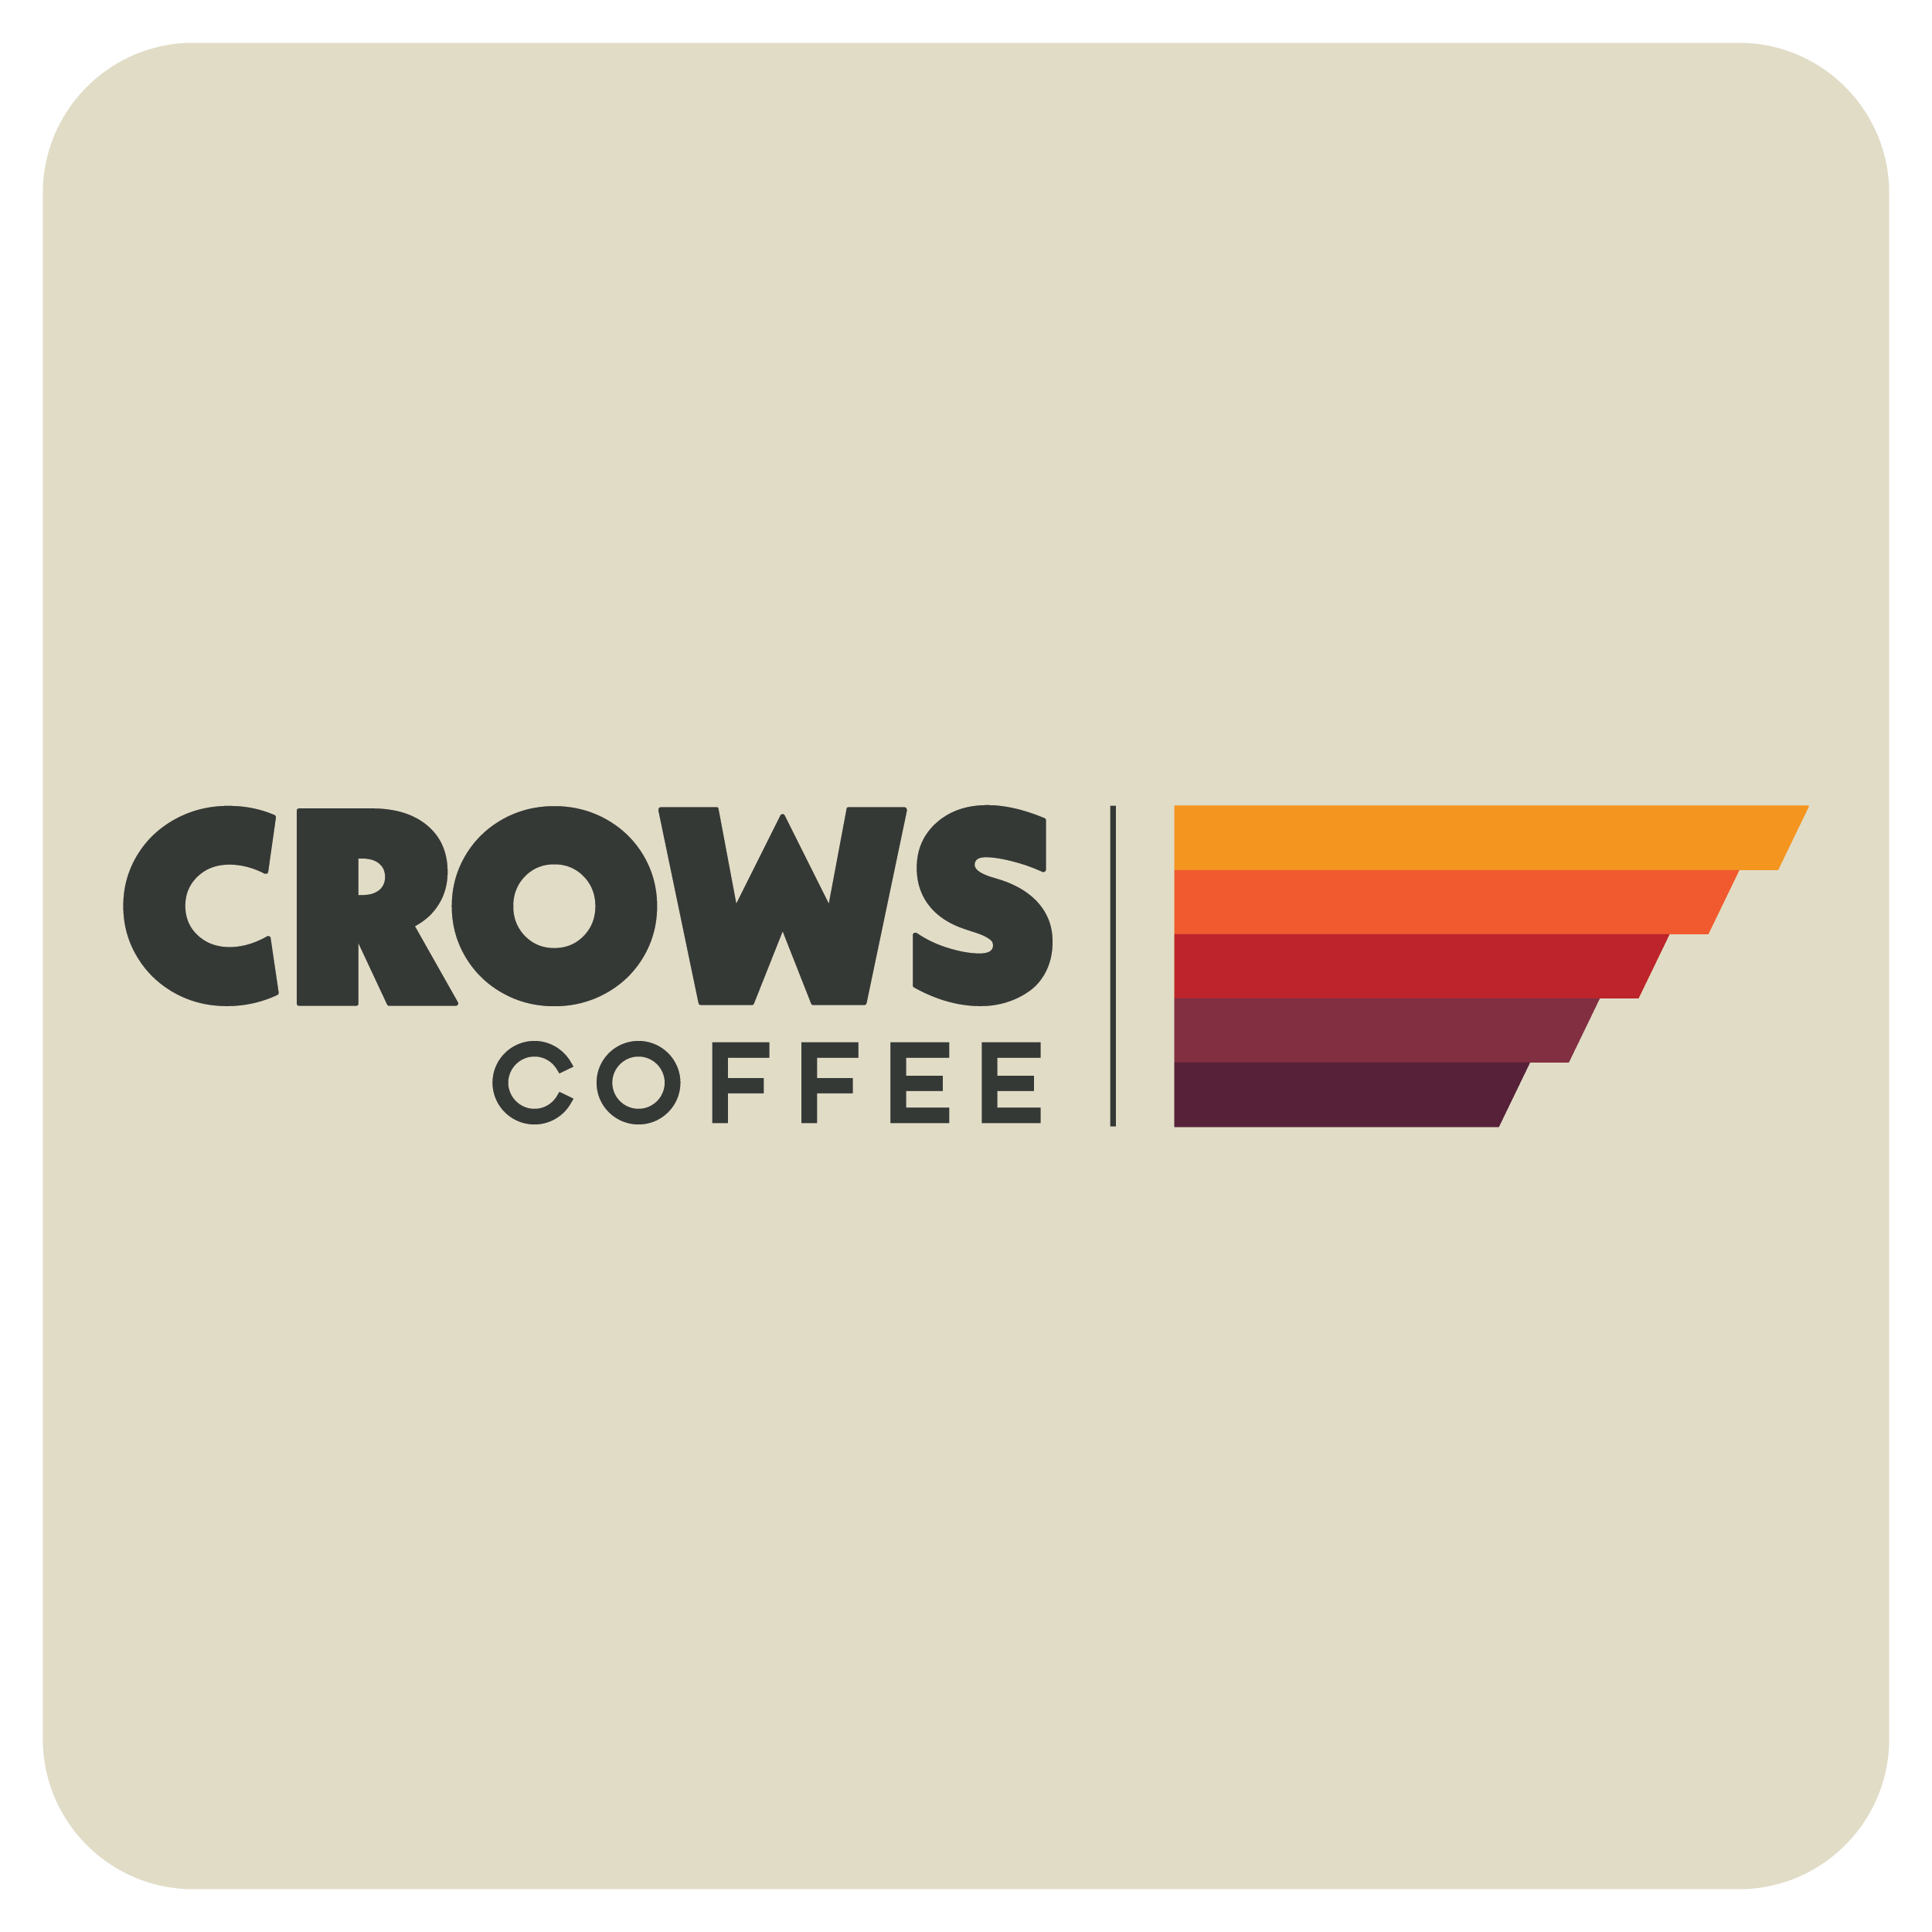 Crows Coffee Social Logo, Full Color Logo on Beige Background